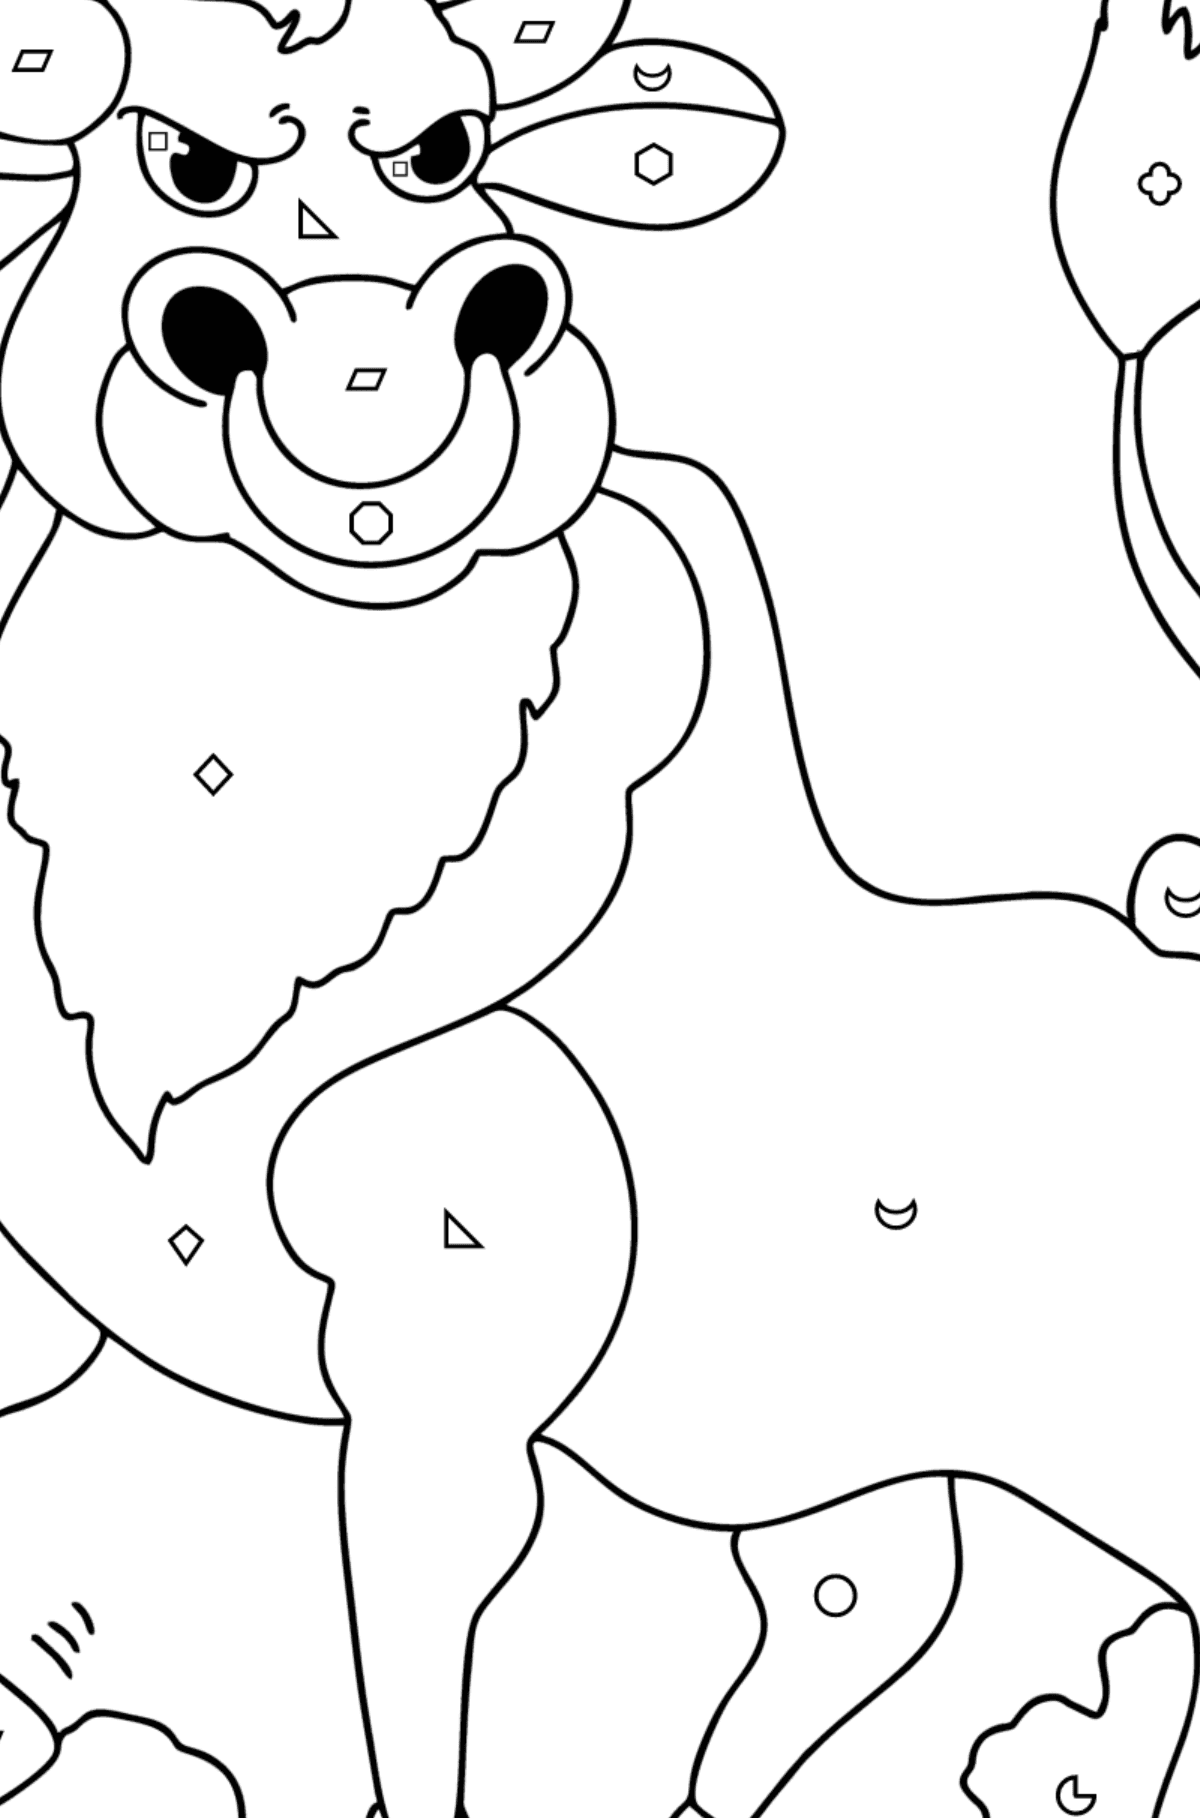 Brave bull Coloring page - Coloring by Geometric Shapes for Kids